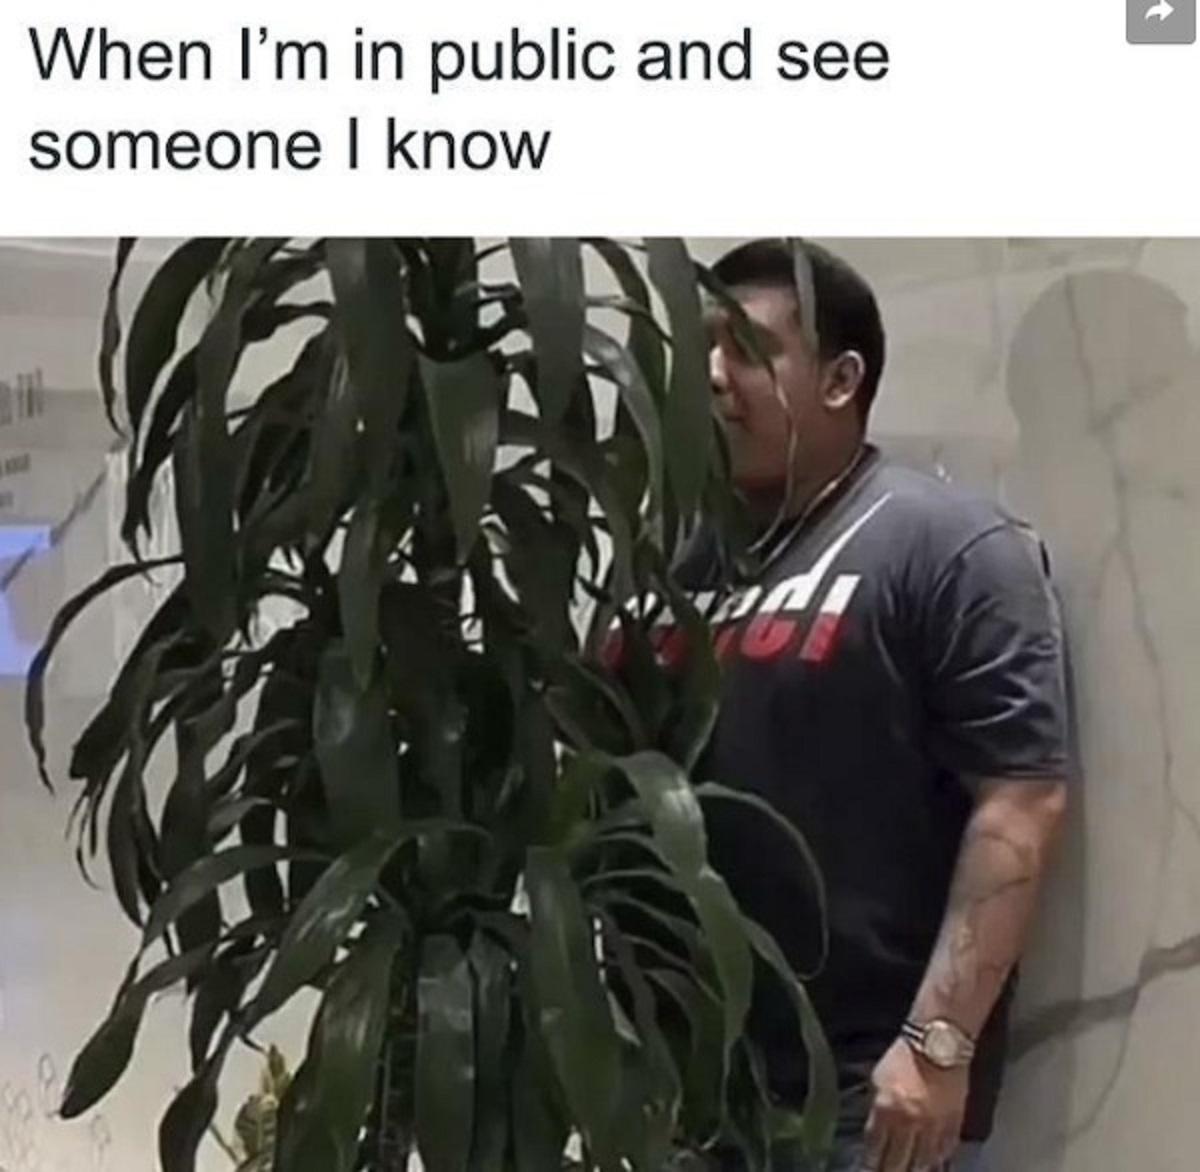 my homie over there meme - When I'm in public and see someone I know